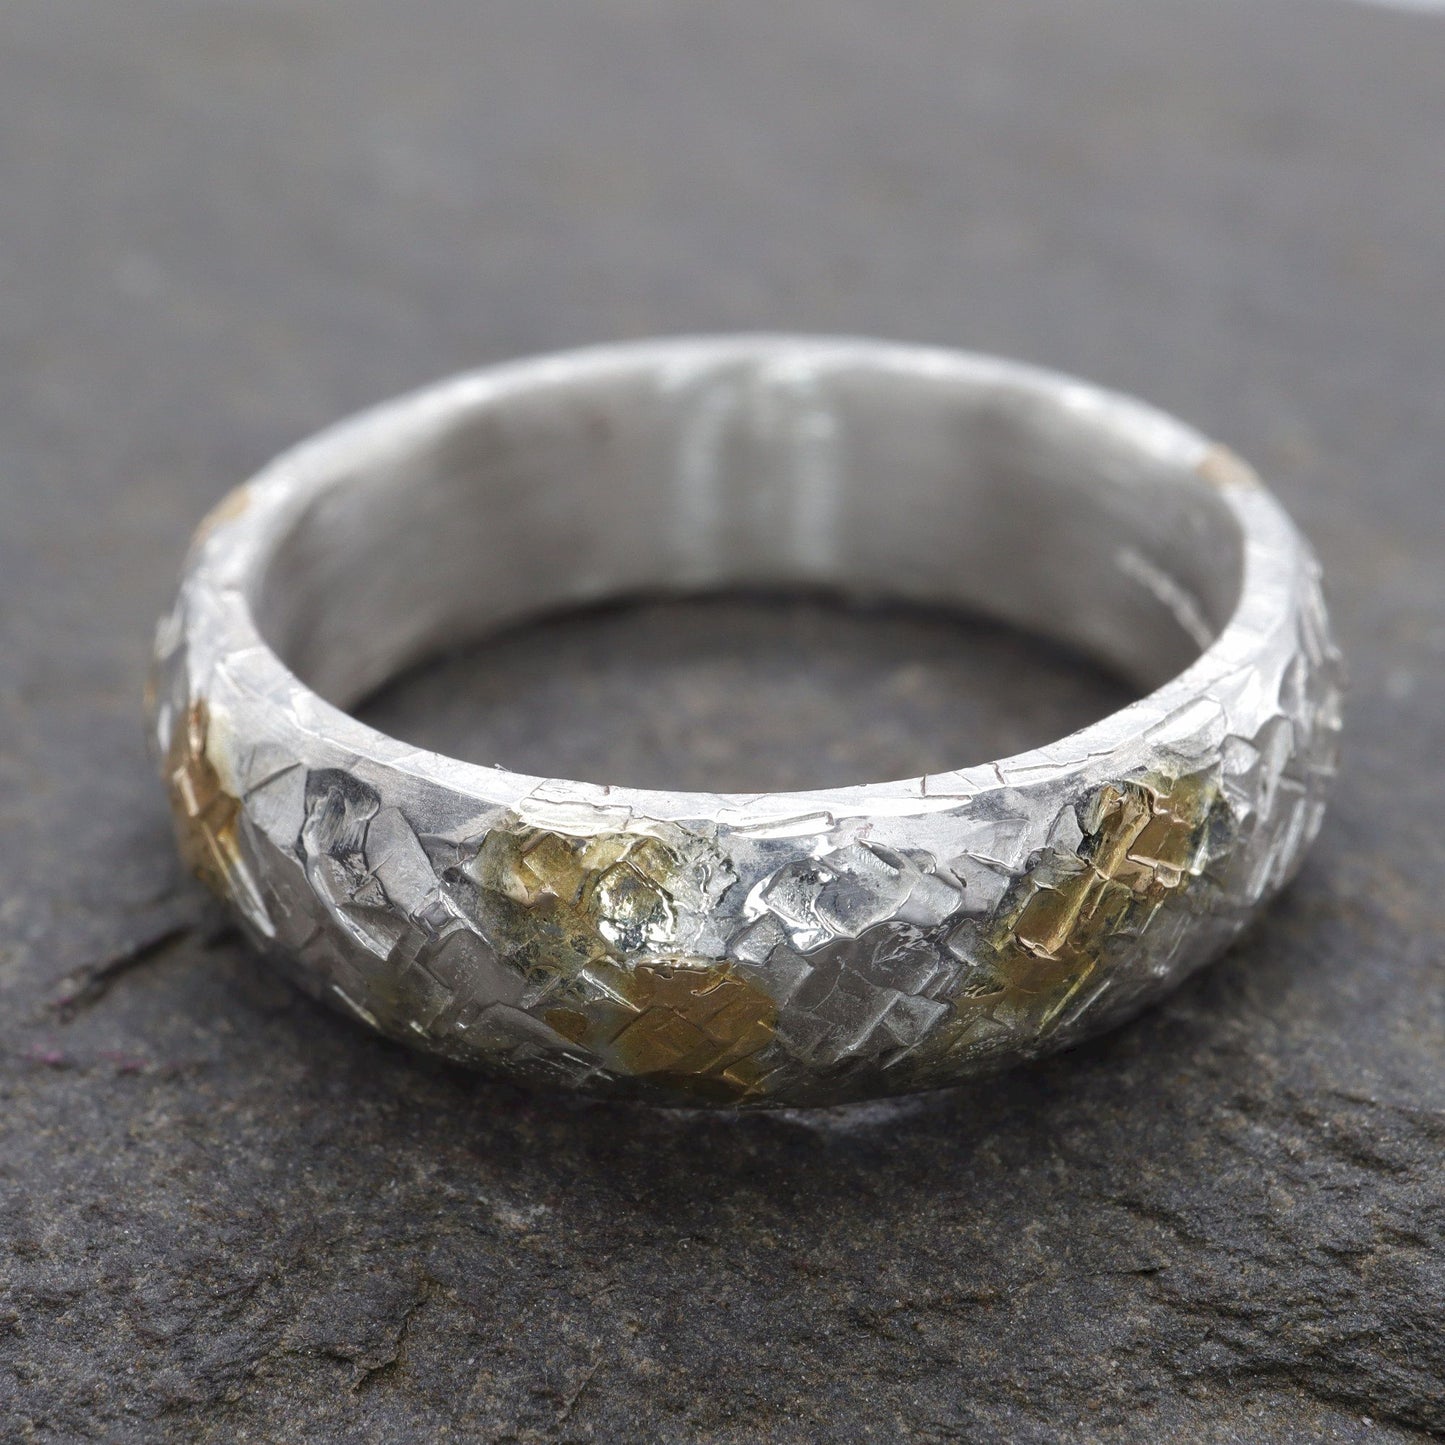 Silver Sunrise 6mm wedding ring with rustic hammered surface. Original design handmade band